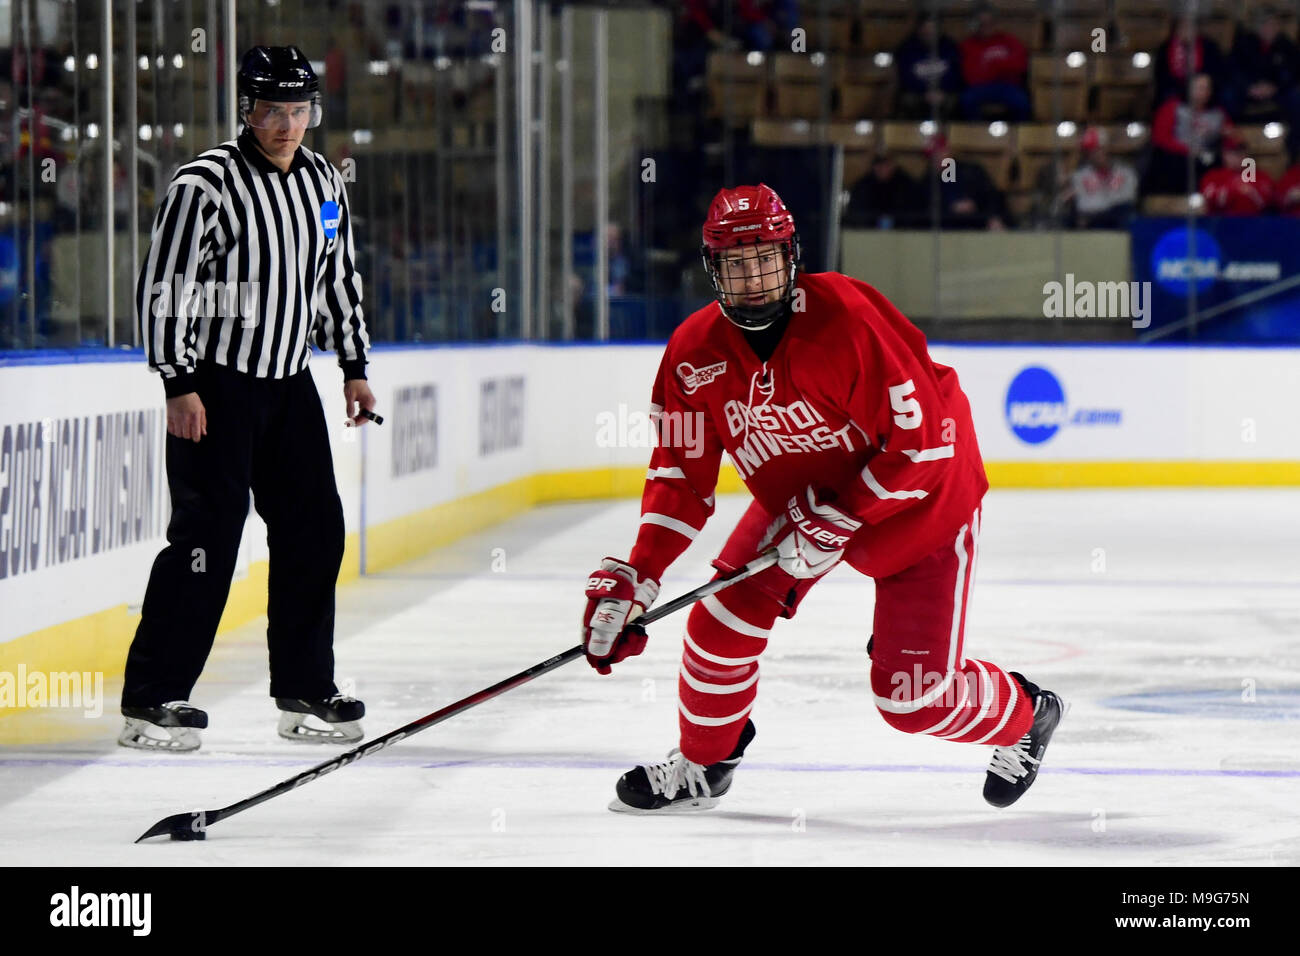 Worcester, Mass. 25th Mar, 2018. Boston University Terriers defenseman Cam Crotty (5) in game action during the NCAA Division I Northeast Regional Championship between Boston University and Michigan held at the DCU Center in Worcester, Mass. Michigan defeats Boston 6-3. Eric Canha/CSM/Alamy Live News Stock Photo